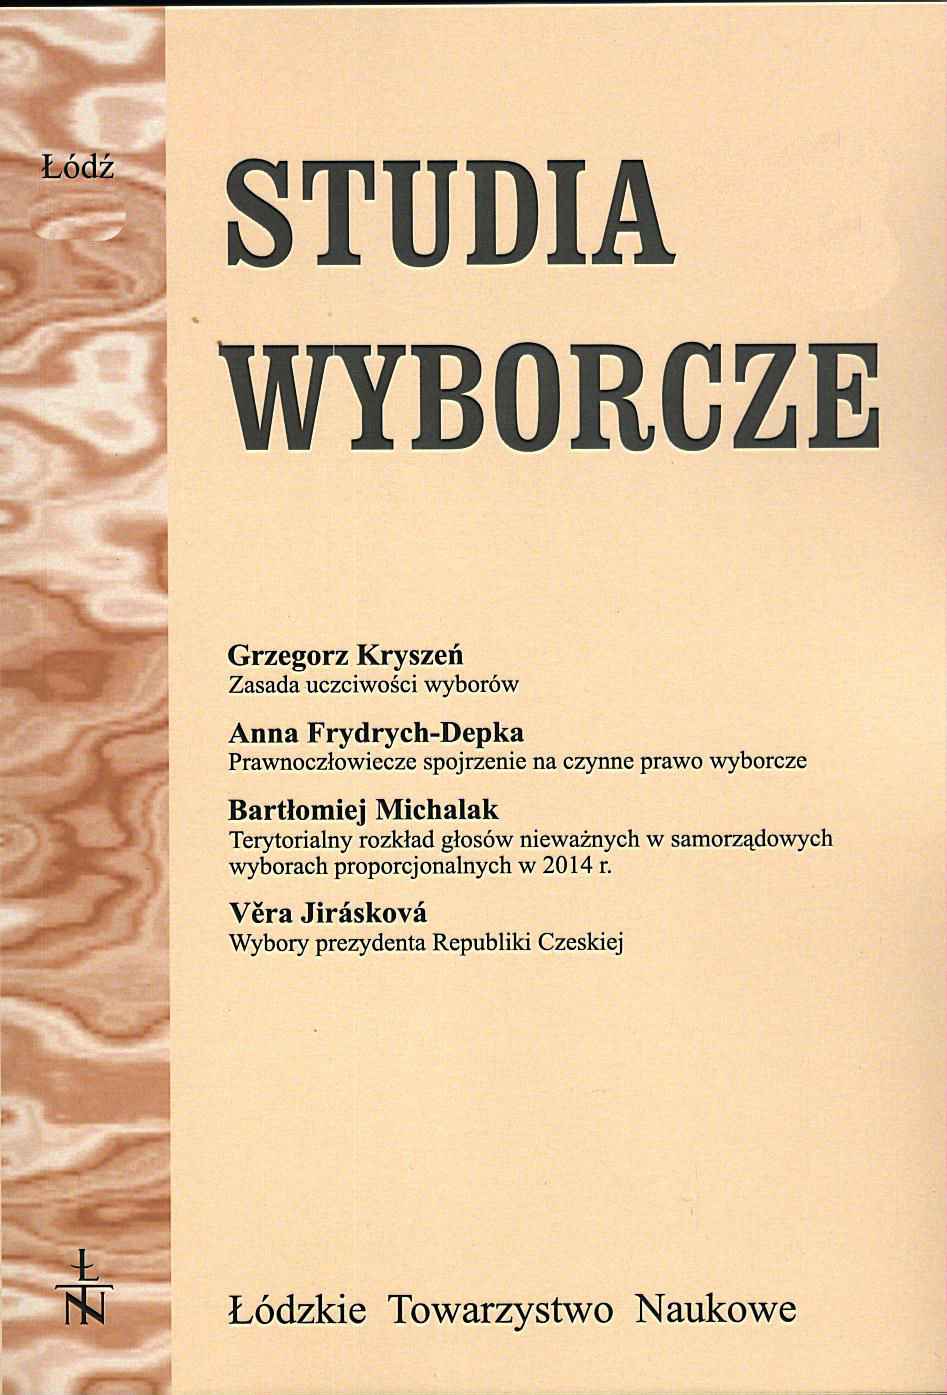 Voting facilities – knowledge, opinions and expectations of Polish citizens Cover Image